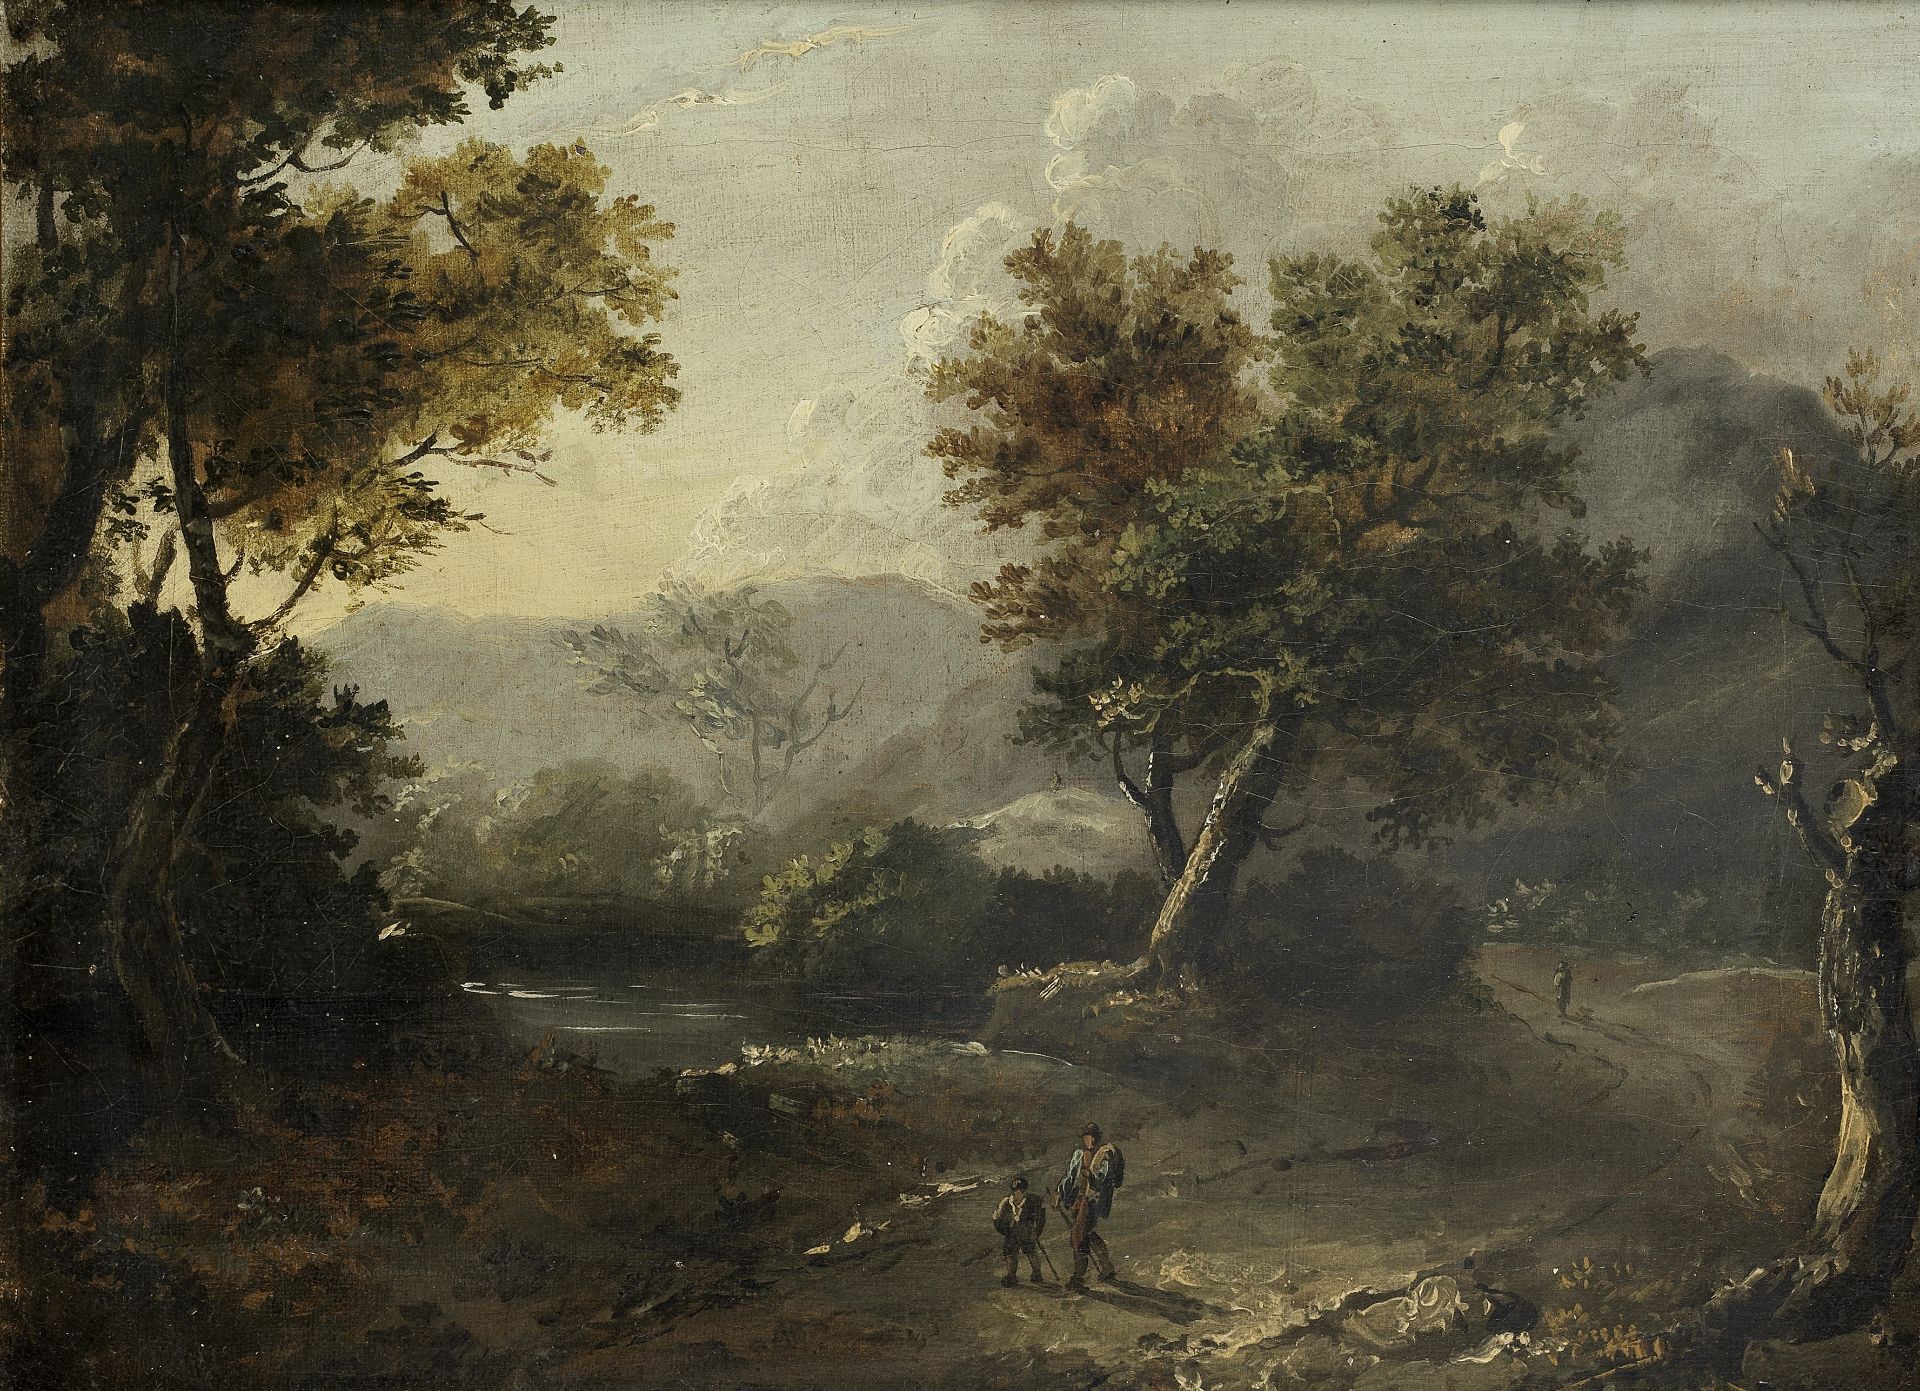 English School, 18th Century A river landscape with travellers on a wooded path